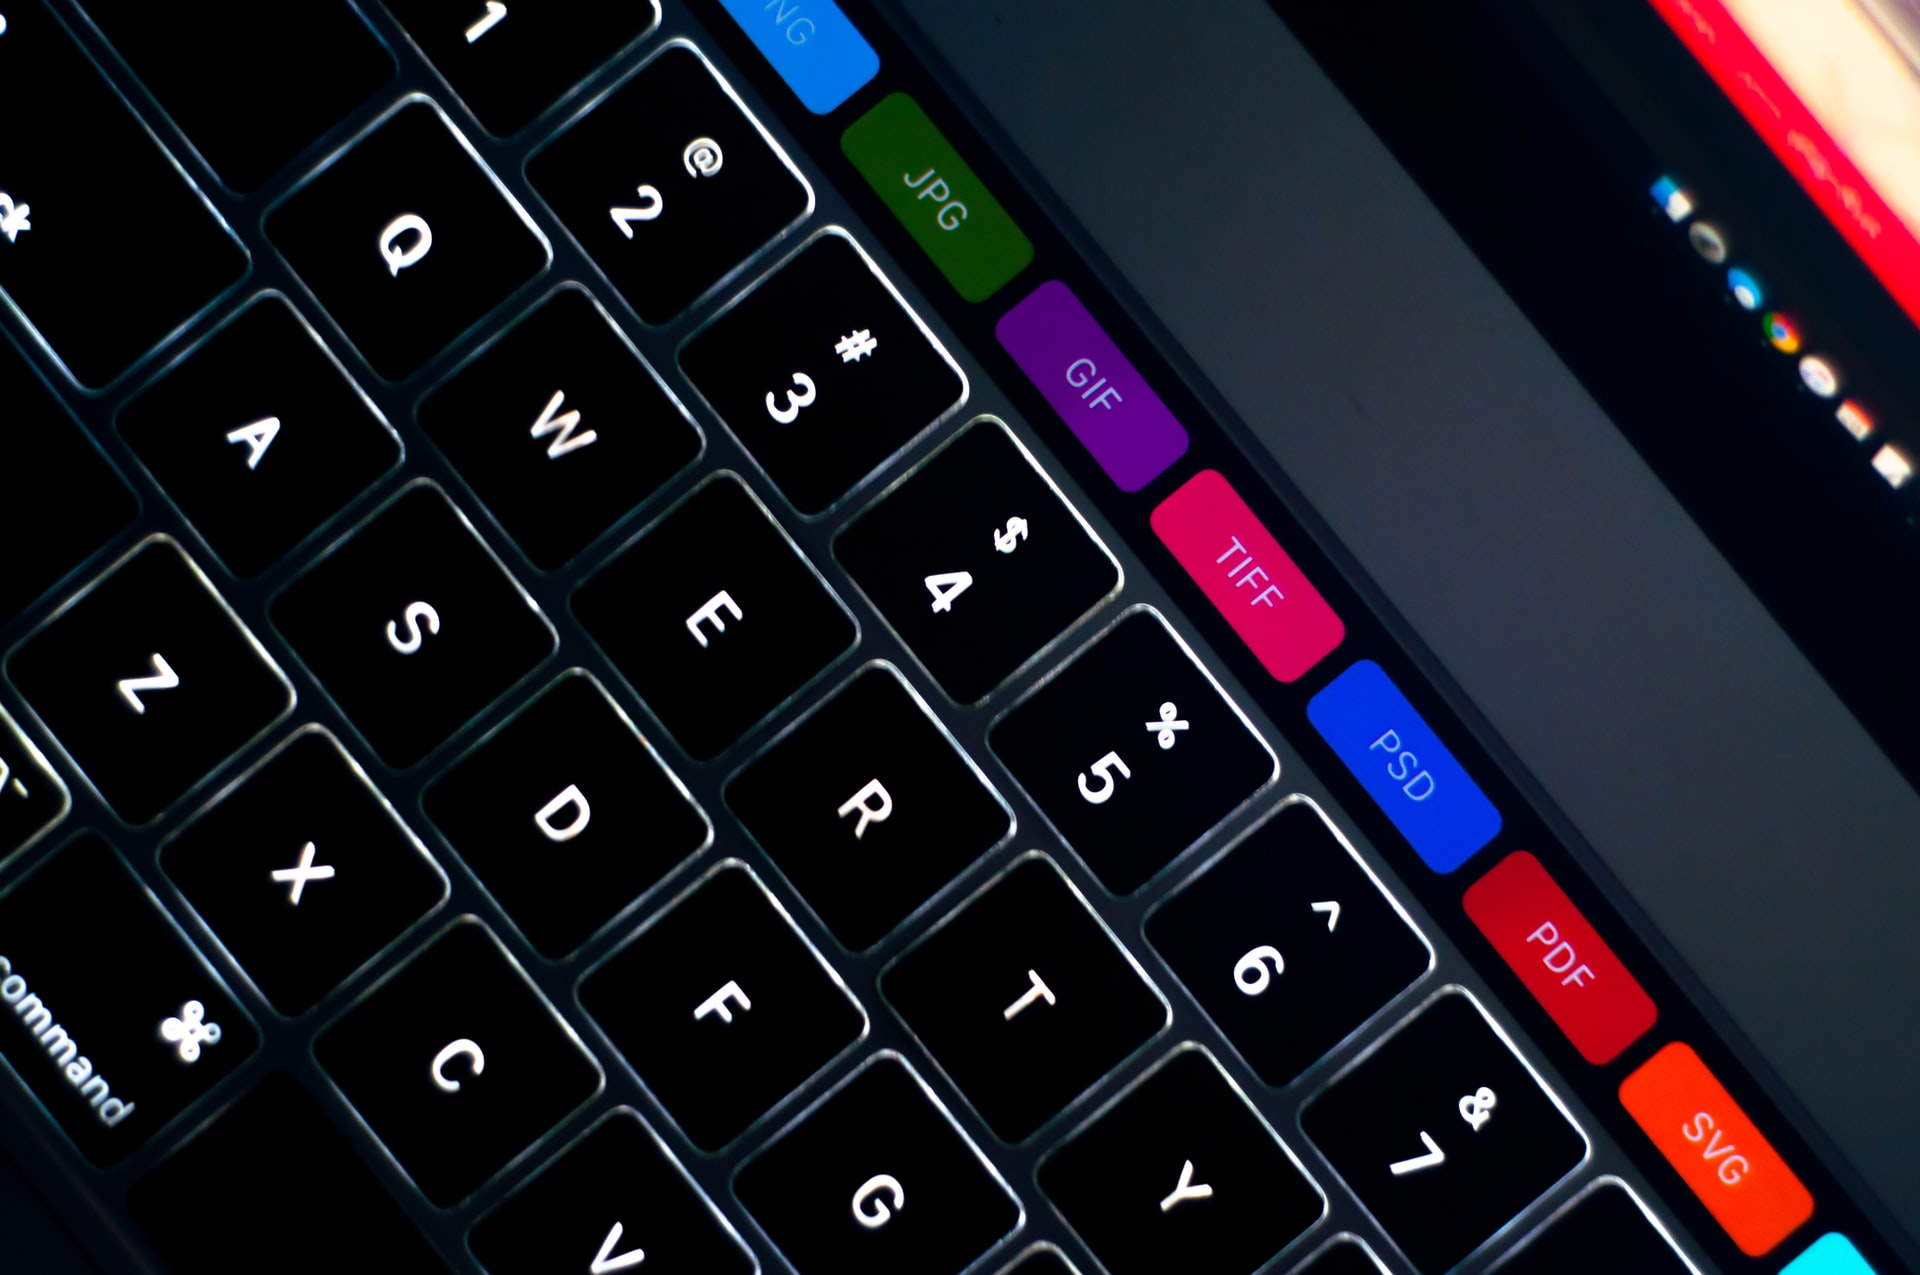 MacBook with a Touch Bar